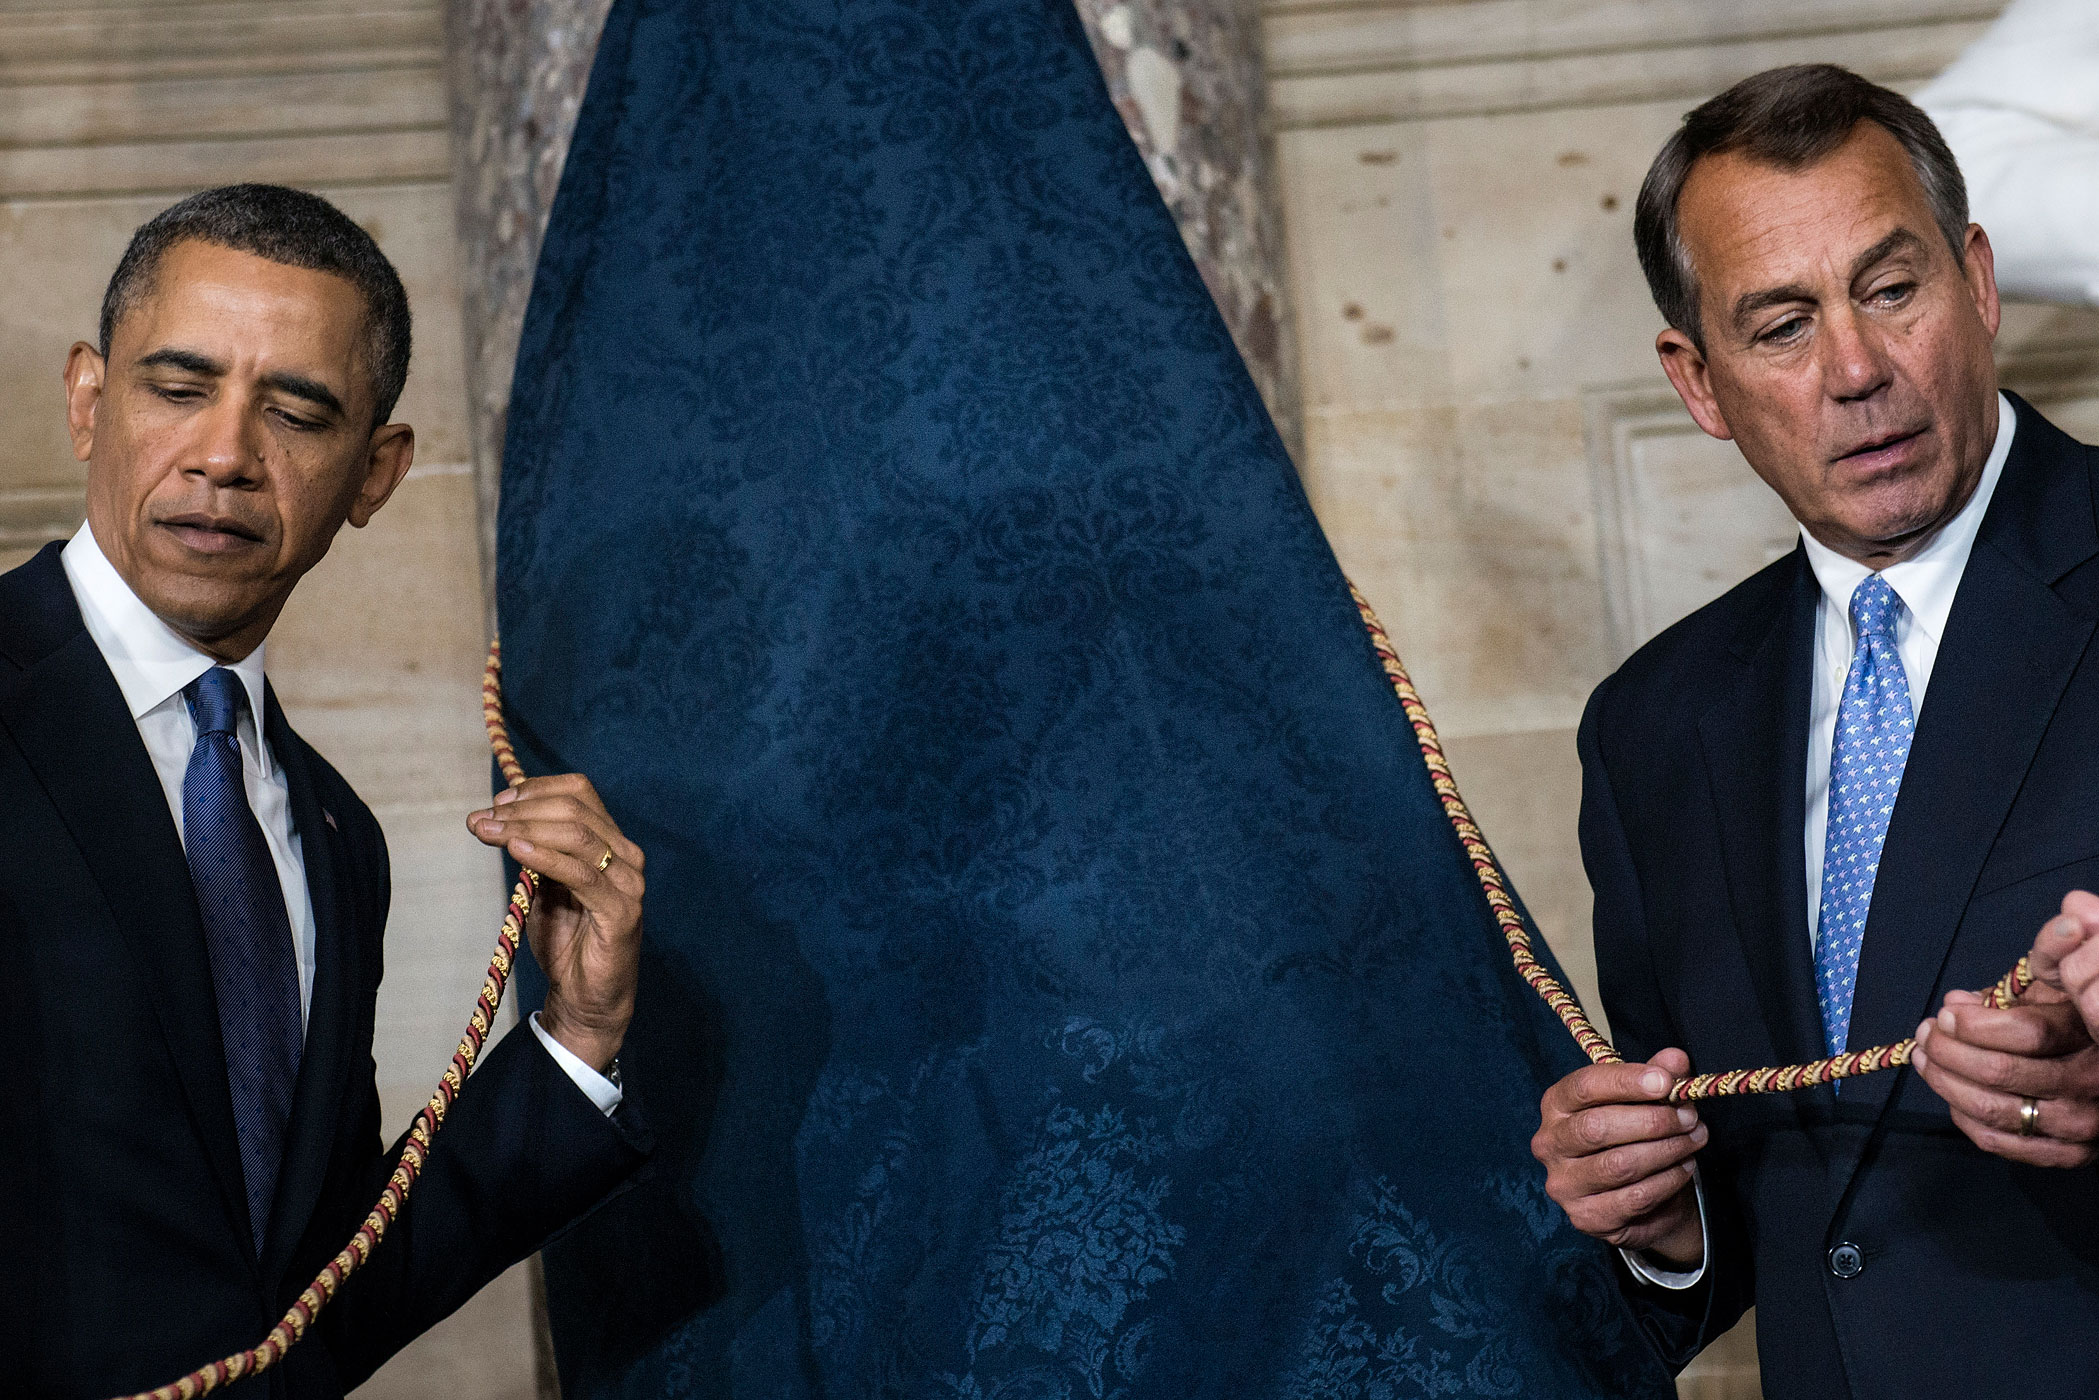 President Barack Obama and Speaker of the House John Boehner wait to unveil a statue of Rosa Parks during an unveiling in Statuary Hall on Capitol Hill in Washington, Feb. 27, 2013.